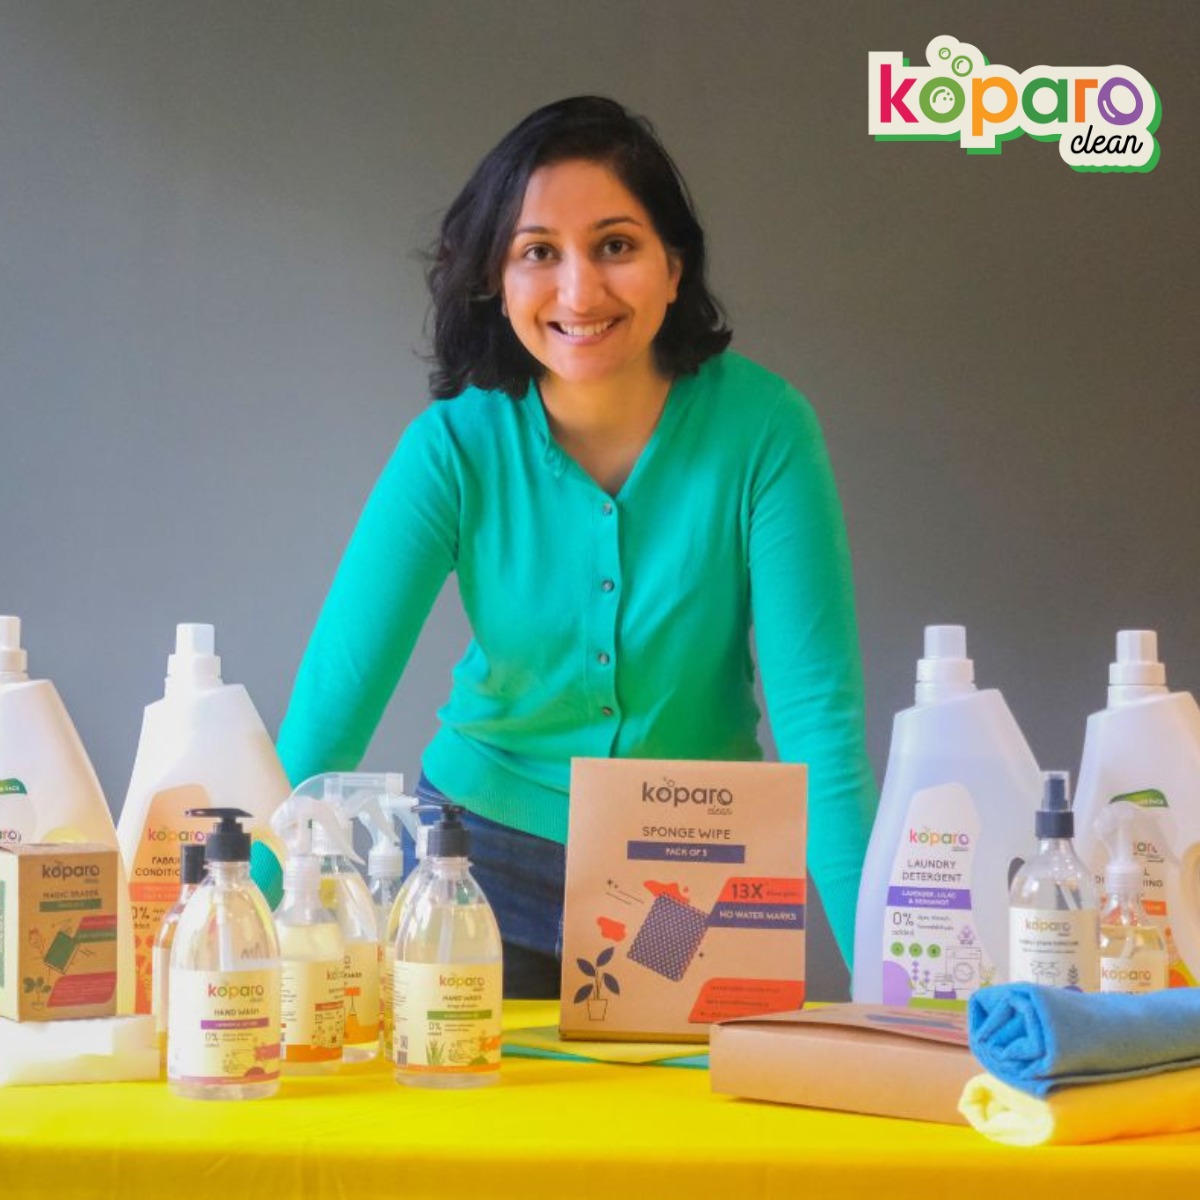 Koparo is made using natural ingredients and avoids harmful chemicals